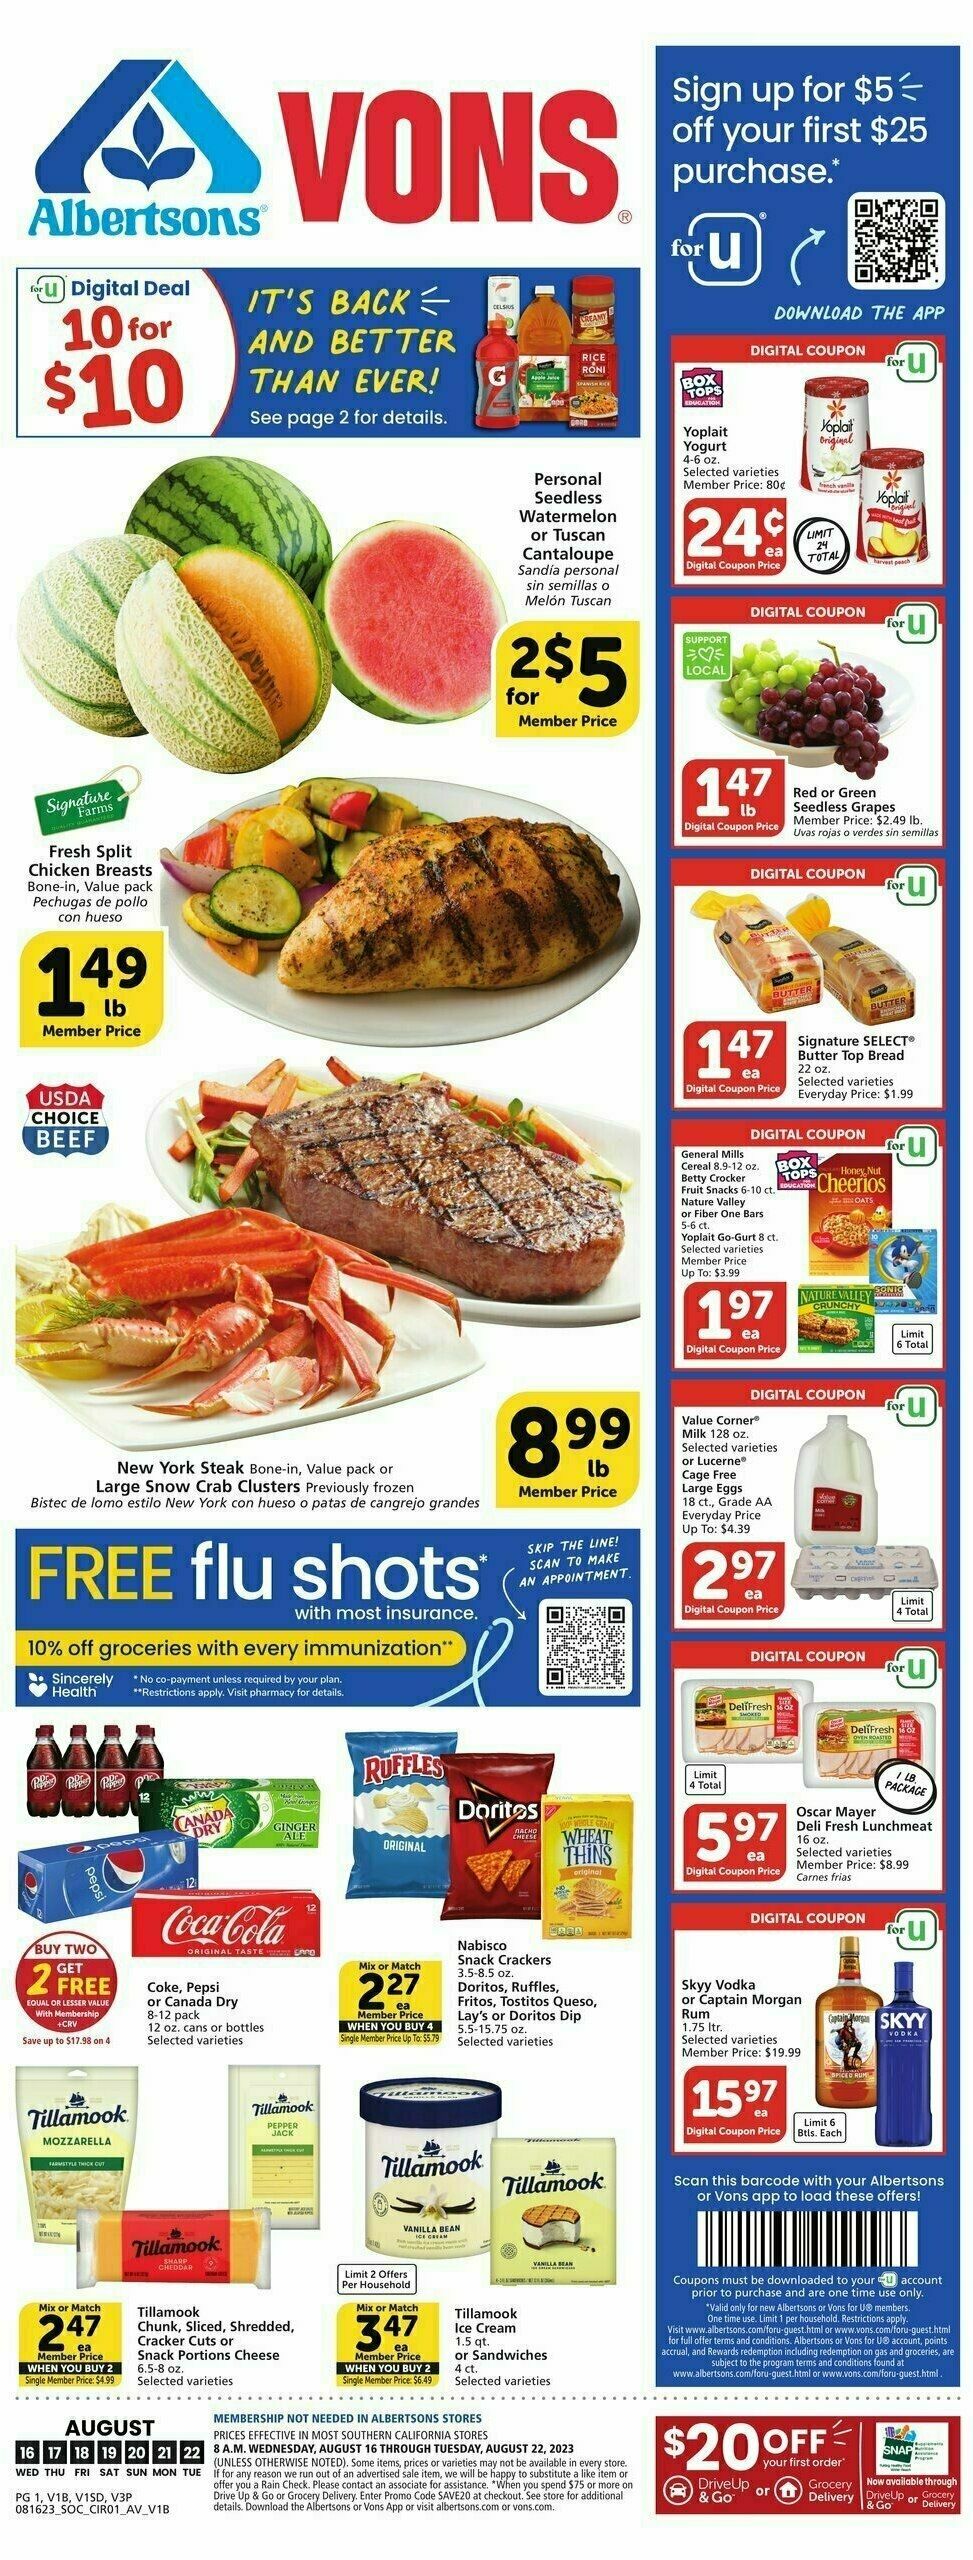 Vons Weekly Ad from August 16